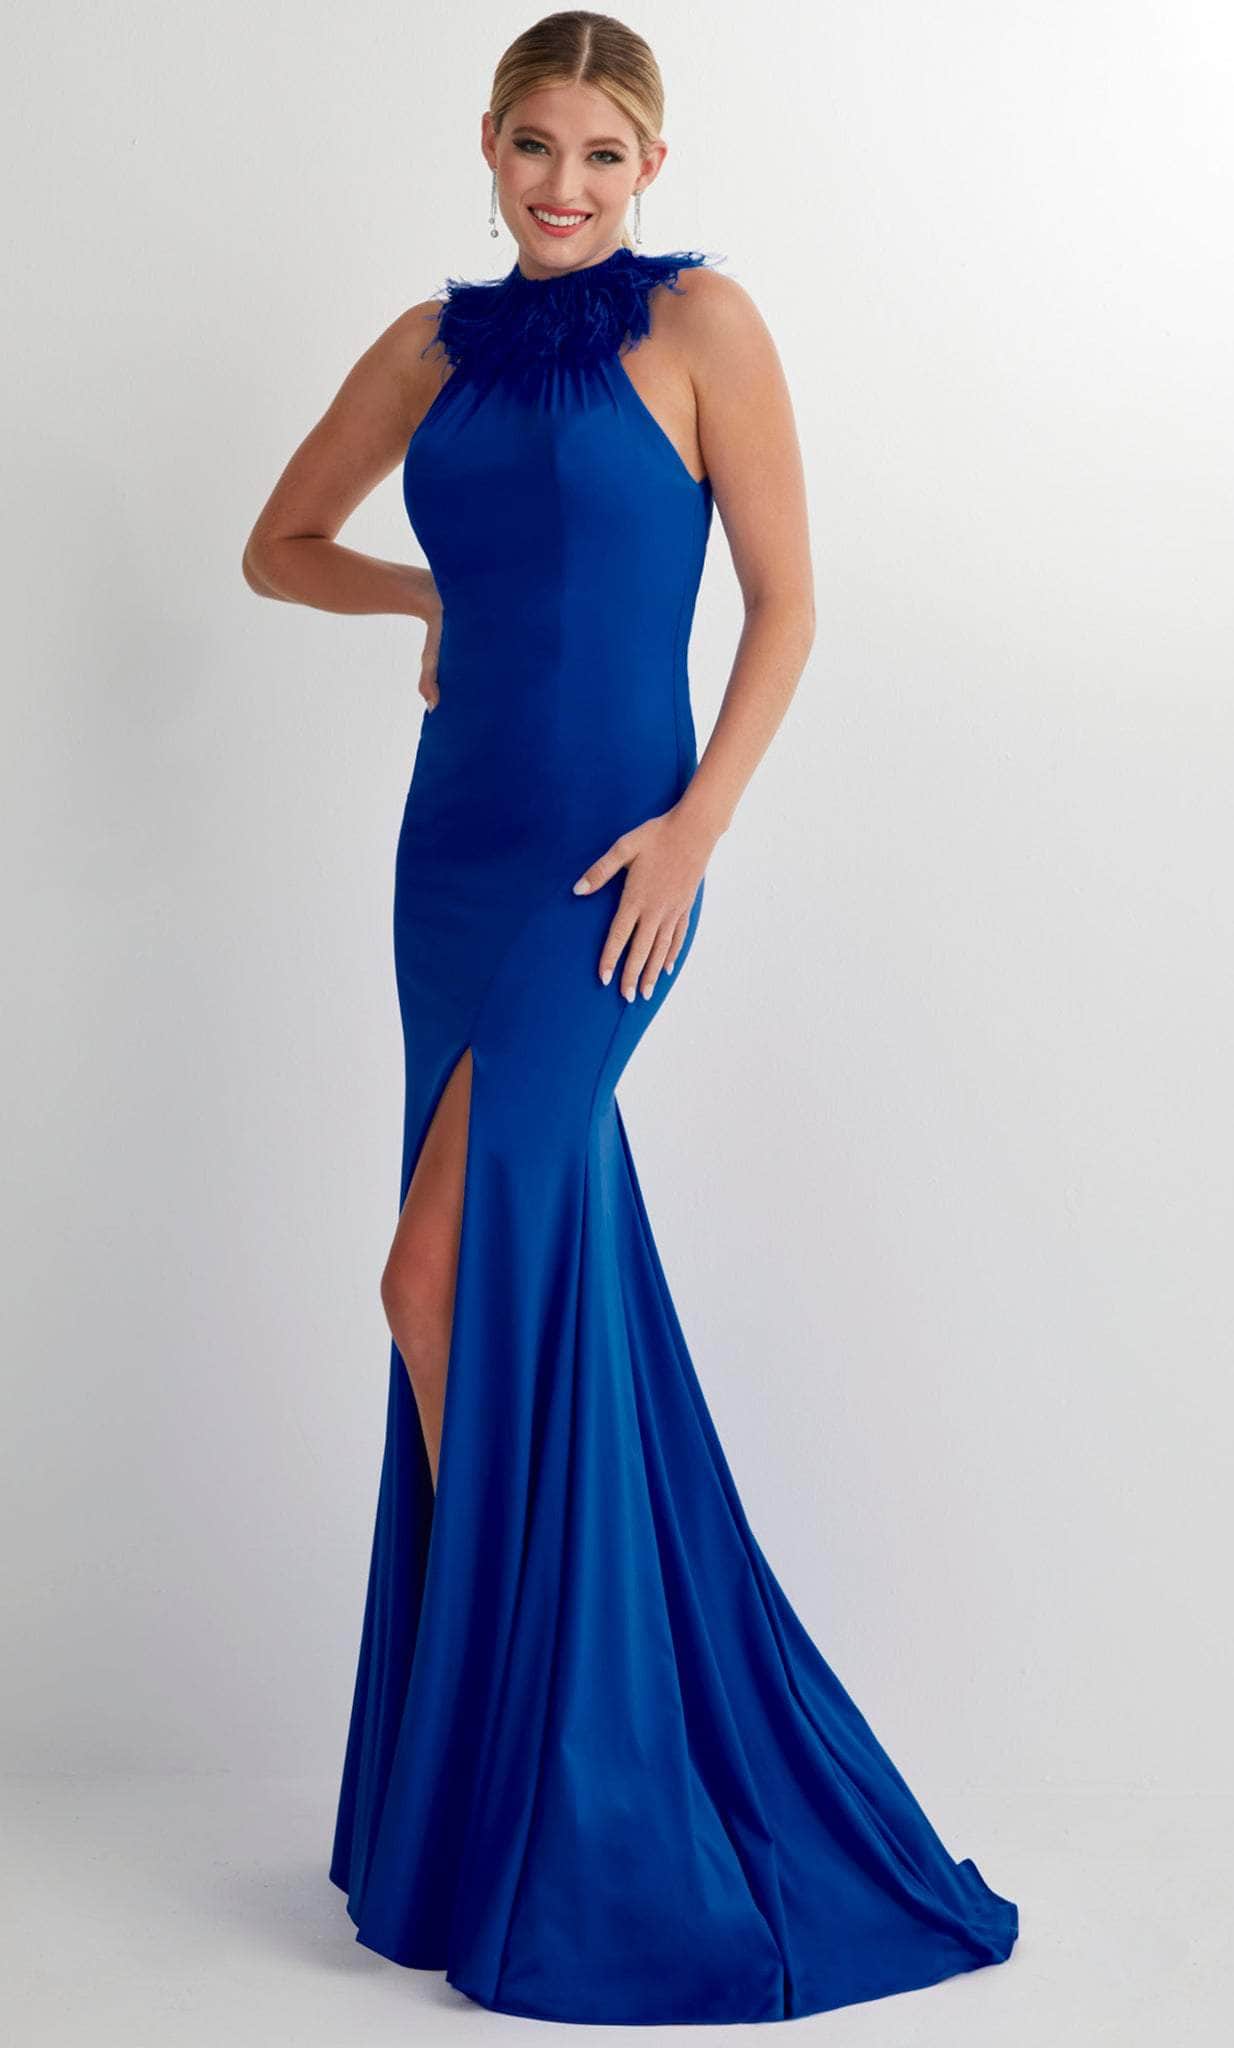 Studio 17 Prom 12913 - Feathered Halter Neck Evening Gown
